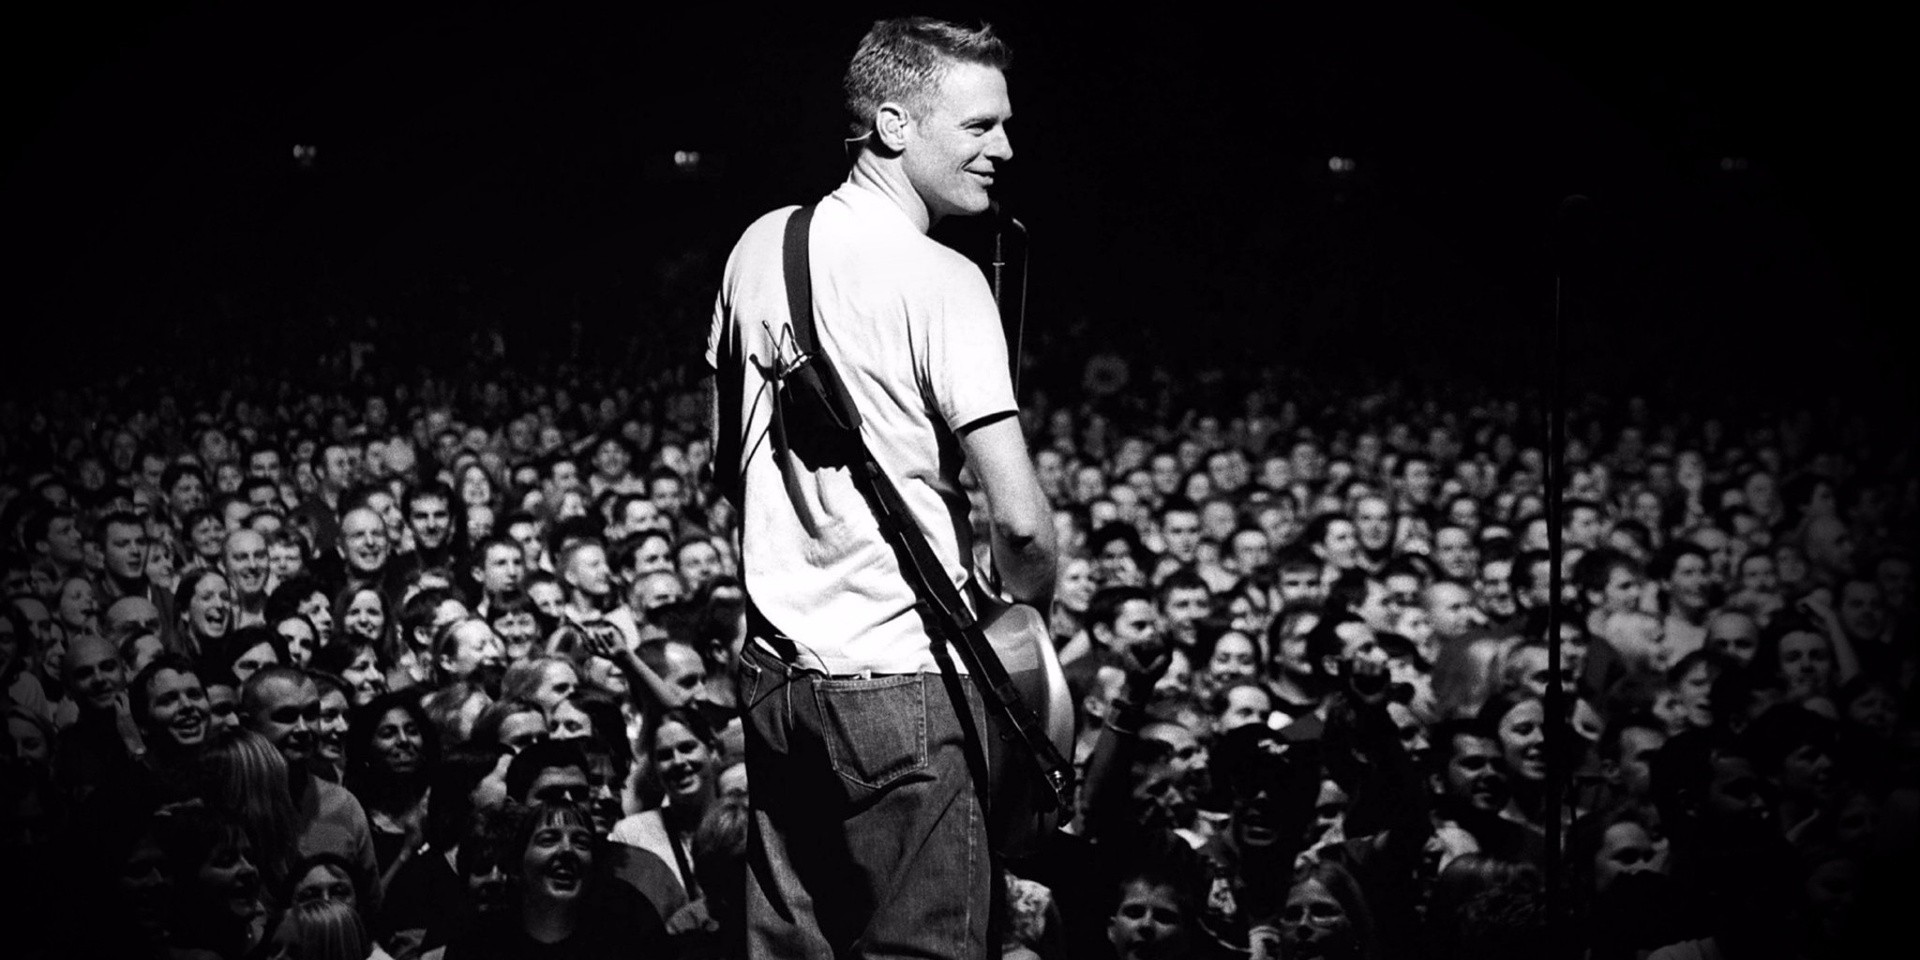 Bryan Adams set for one-night only showcase in Singapore